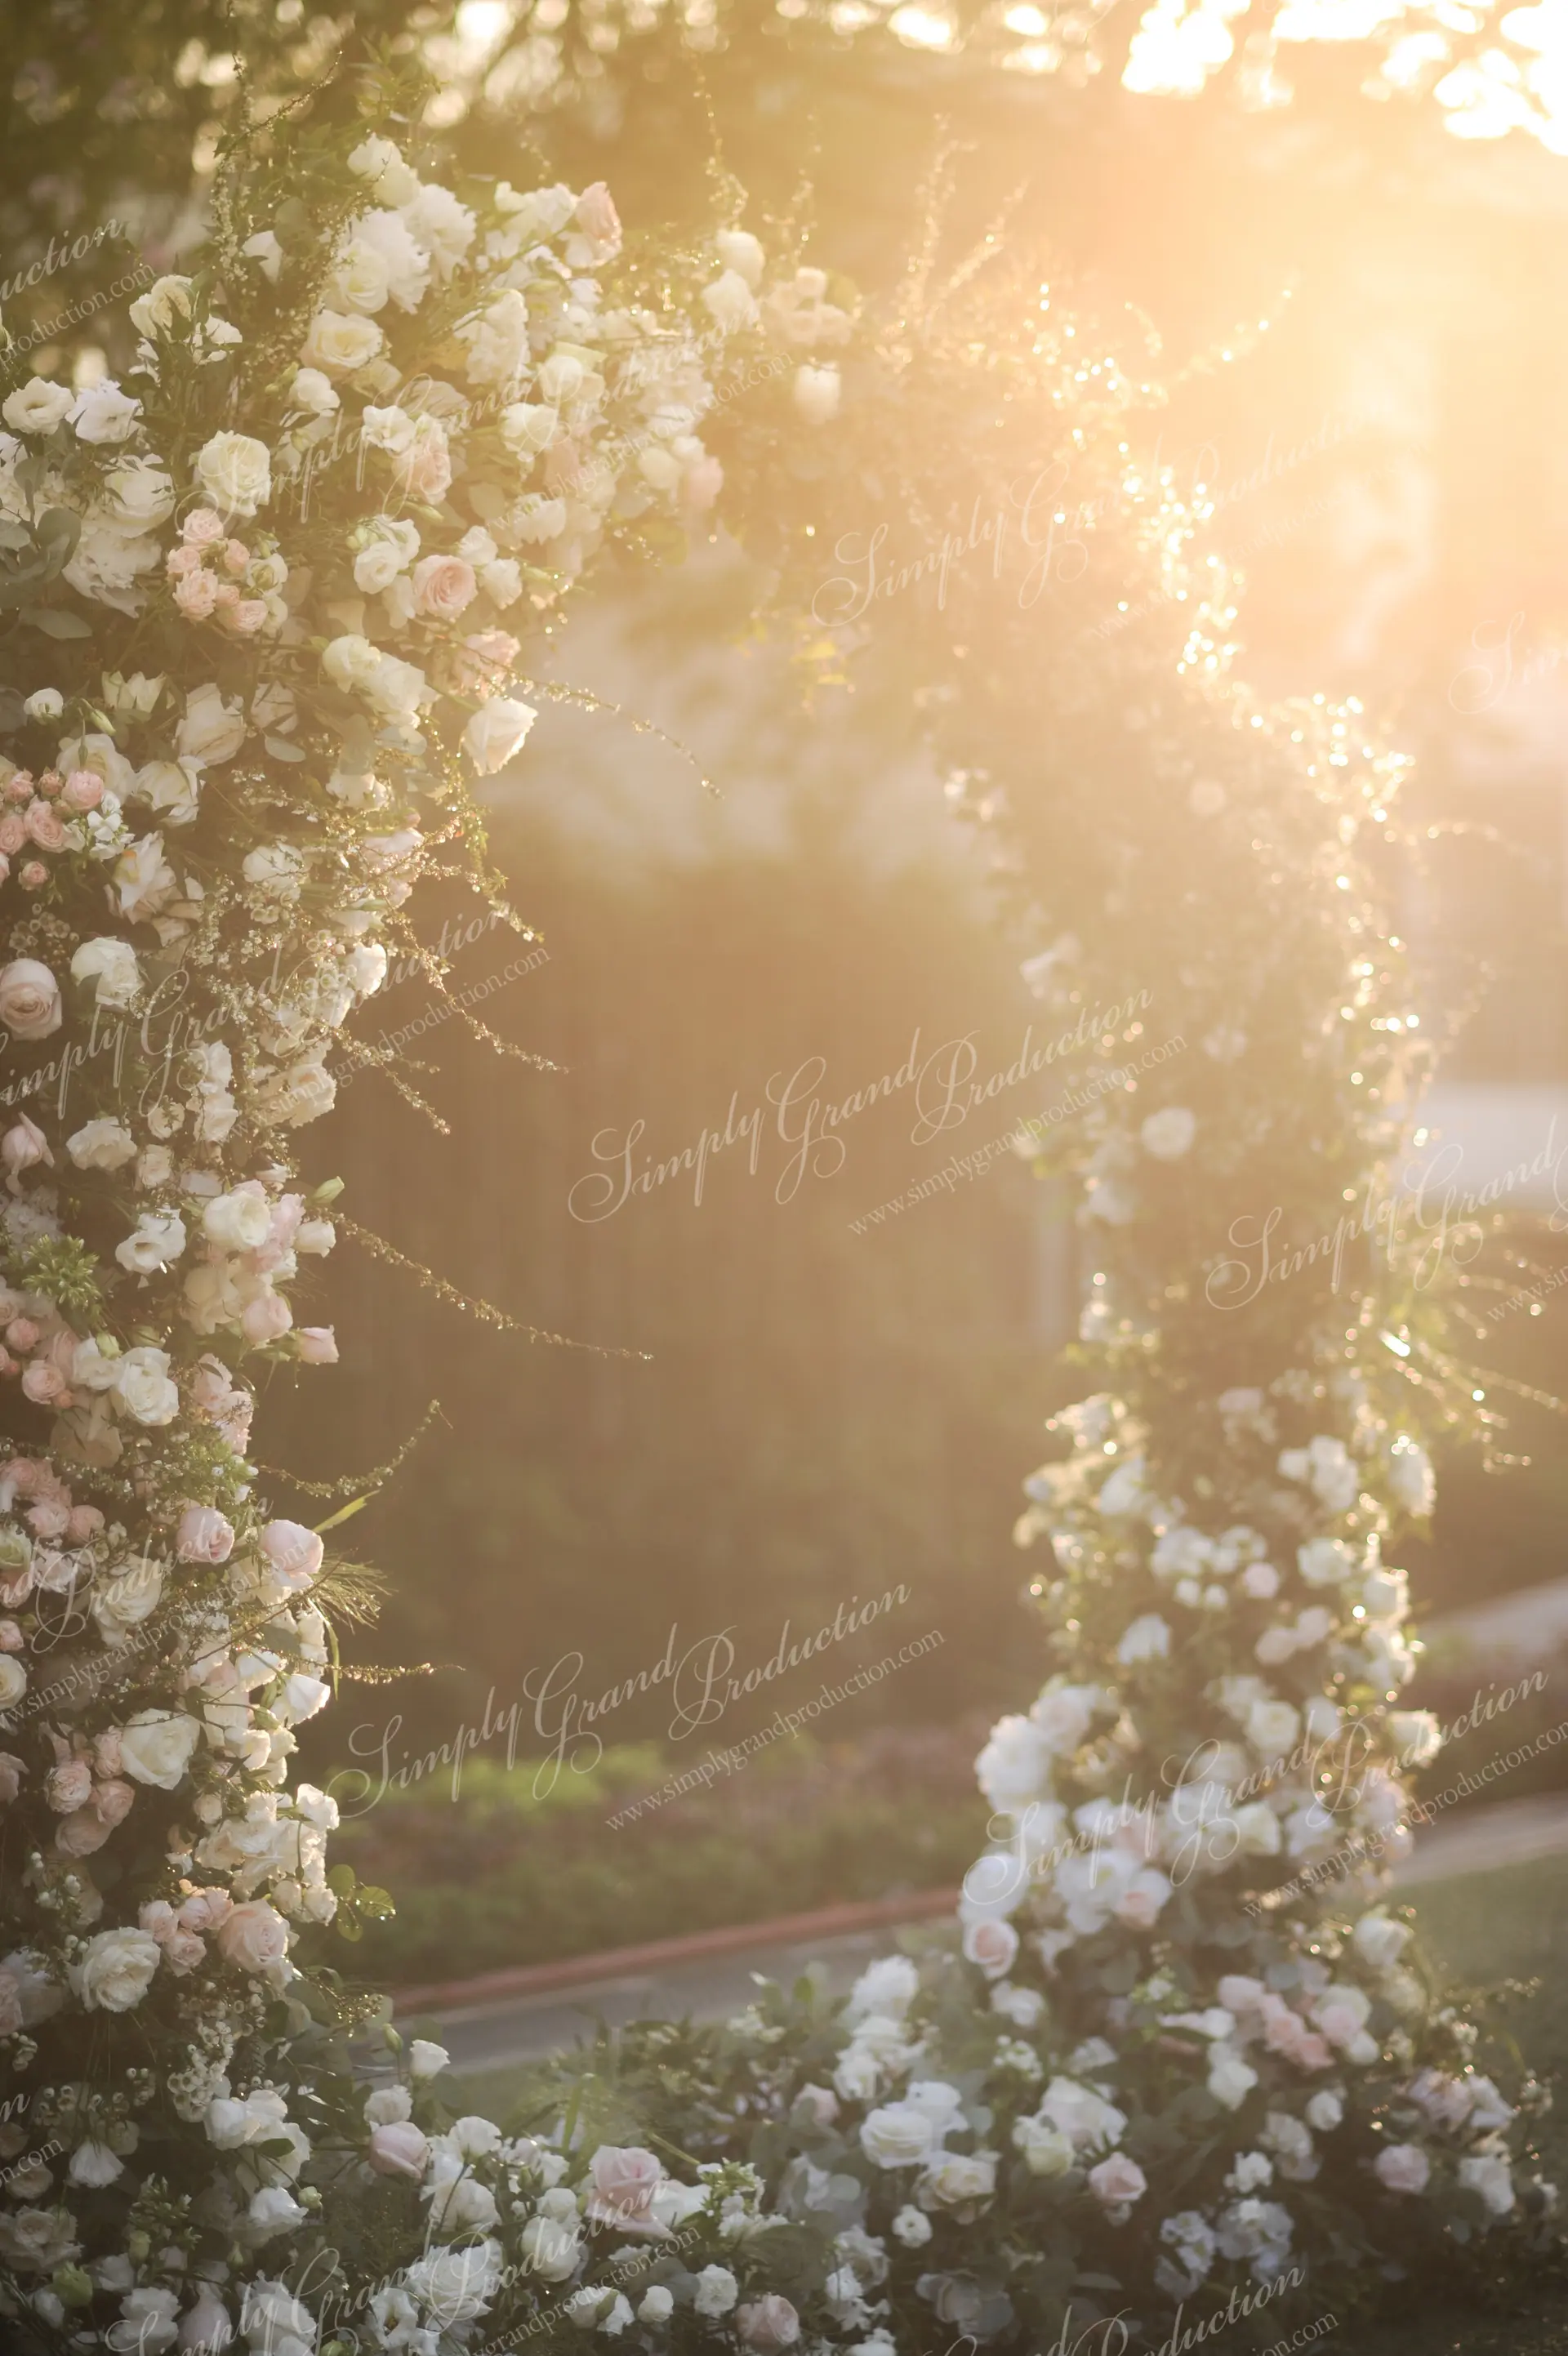 Simply_Grand_Production_Outdoor_wedding_decoration_beas river_floral arch_3.jpg